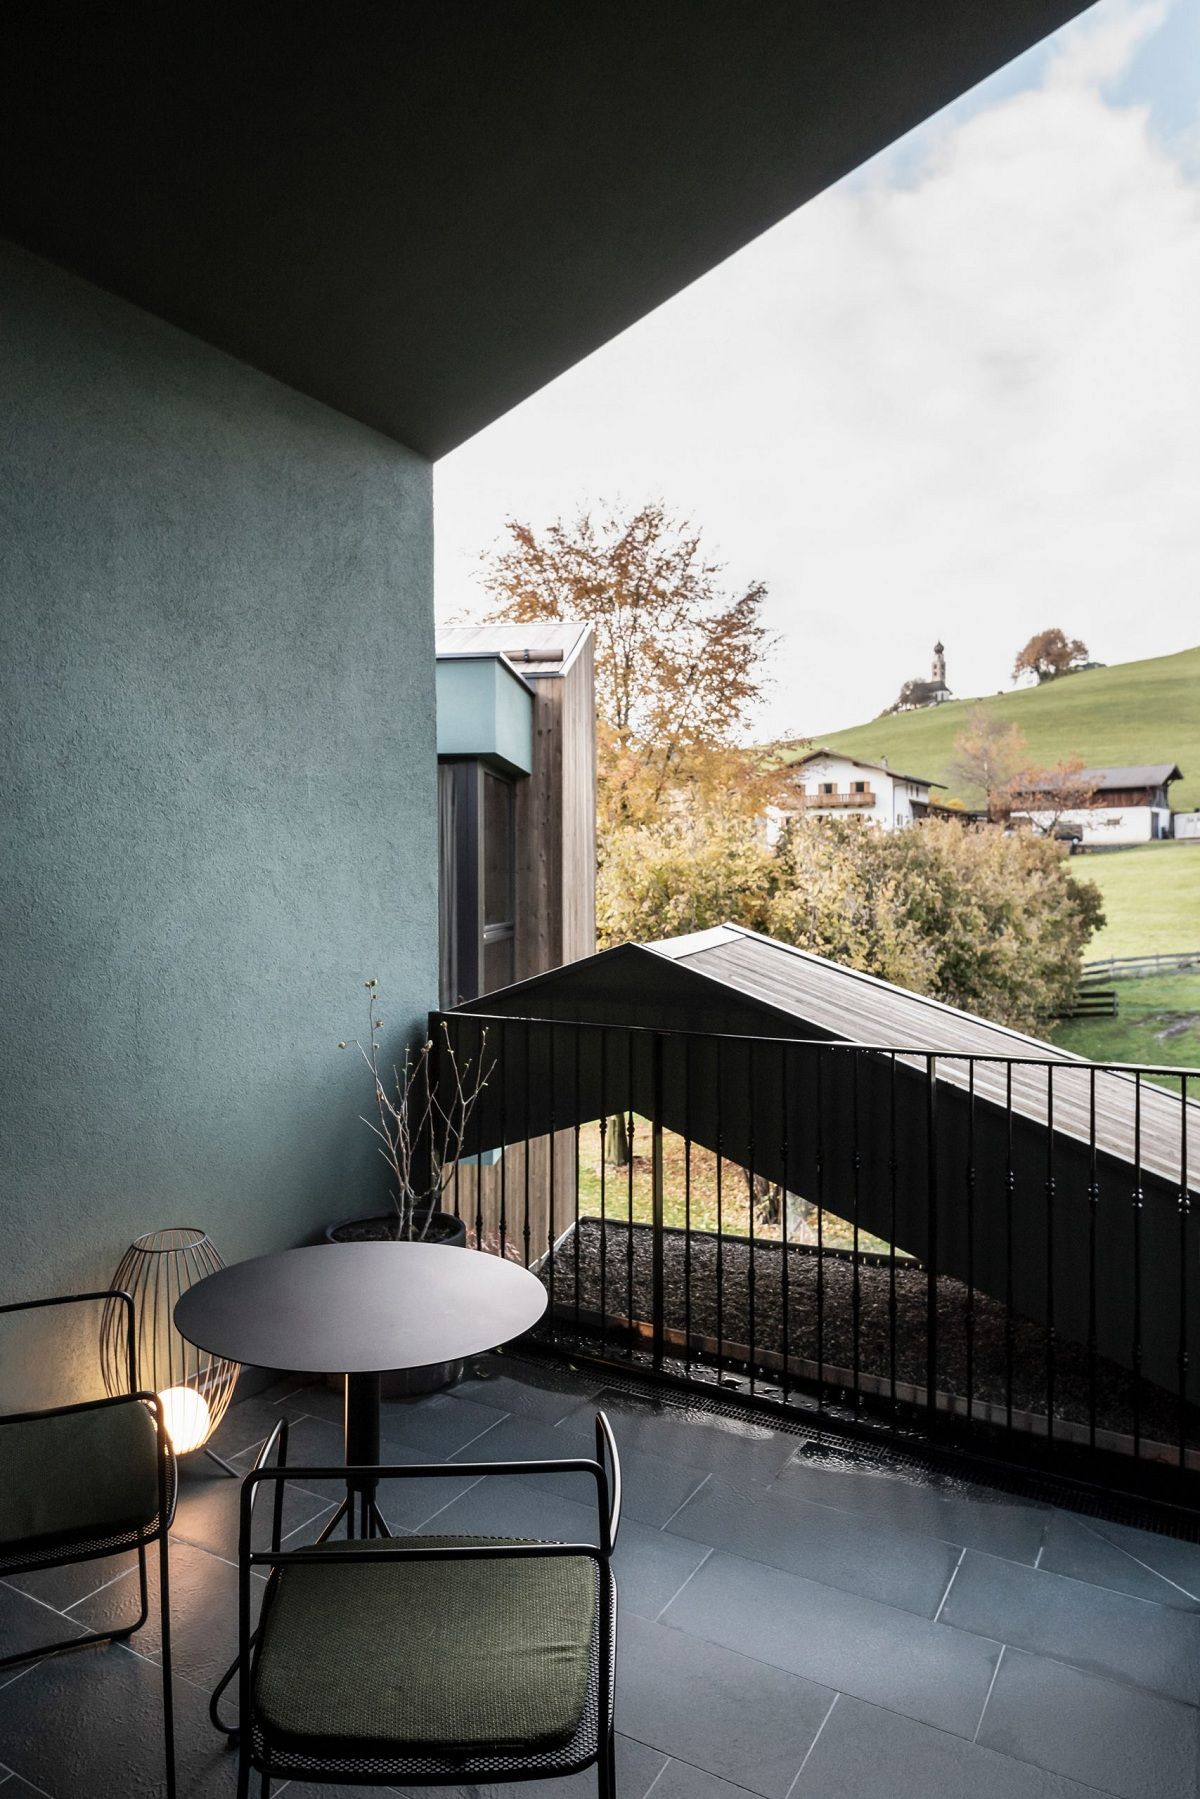 floris hotel extension noa south tyrol italy architecture dezeen 2364 col 20 scaled 1